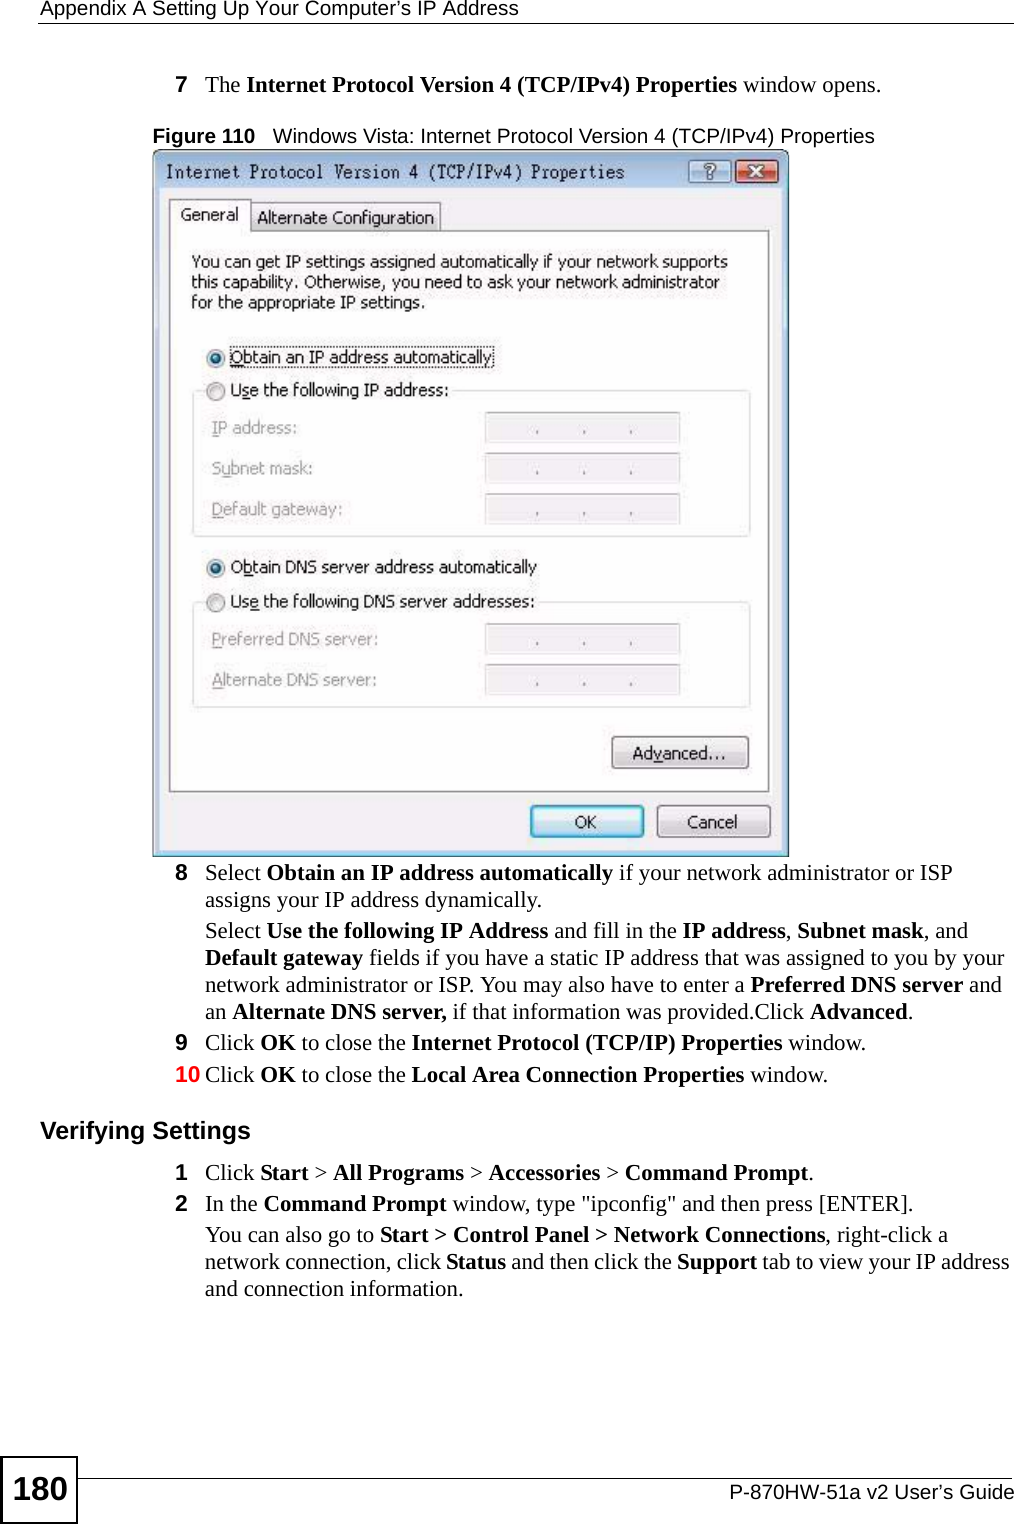 Appendix A Setting Up Your Computer’s IP AddressP-870HW-51a v2 User’s Guide1807The Internet Protocol Version 4 (TCP/IPv4) Properties window opens.Figure 110   Windows Vista: Internet Protocol Version 4 (TCP/IPv4) Properties8Select Obtain an IP address automatically if your network administrator or ISP assigns your IP address dynamically.Select Use the following IP Address and fill in the IP address, Subnet mask, and Default gateway fields if you have a static IP address that was assigned to you by your network administrator or ISP. You may also have to enter a Preferred DNS server and an Alternate DNS server, if that information was provided.Click Advanced.9Click OK to close the Internet Protocol (TCP/IP) Properties window.10 Click OK to close the Local Area Connection Properties window.Verifying Settings1Click Start &gt; All Programs &gt; Accessories &gt; Command Prompt.2In the Command Prompt window, type &quot;ipconfig&quot; and then press [ENTER]. You can also go to Start &gt; Control Panel &gt; Network Connections, right-click a network connection, click Status and then click the Support tab to view your IP address and connection information.